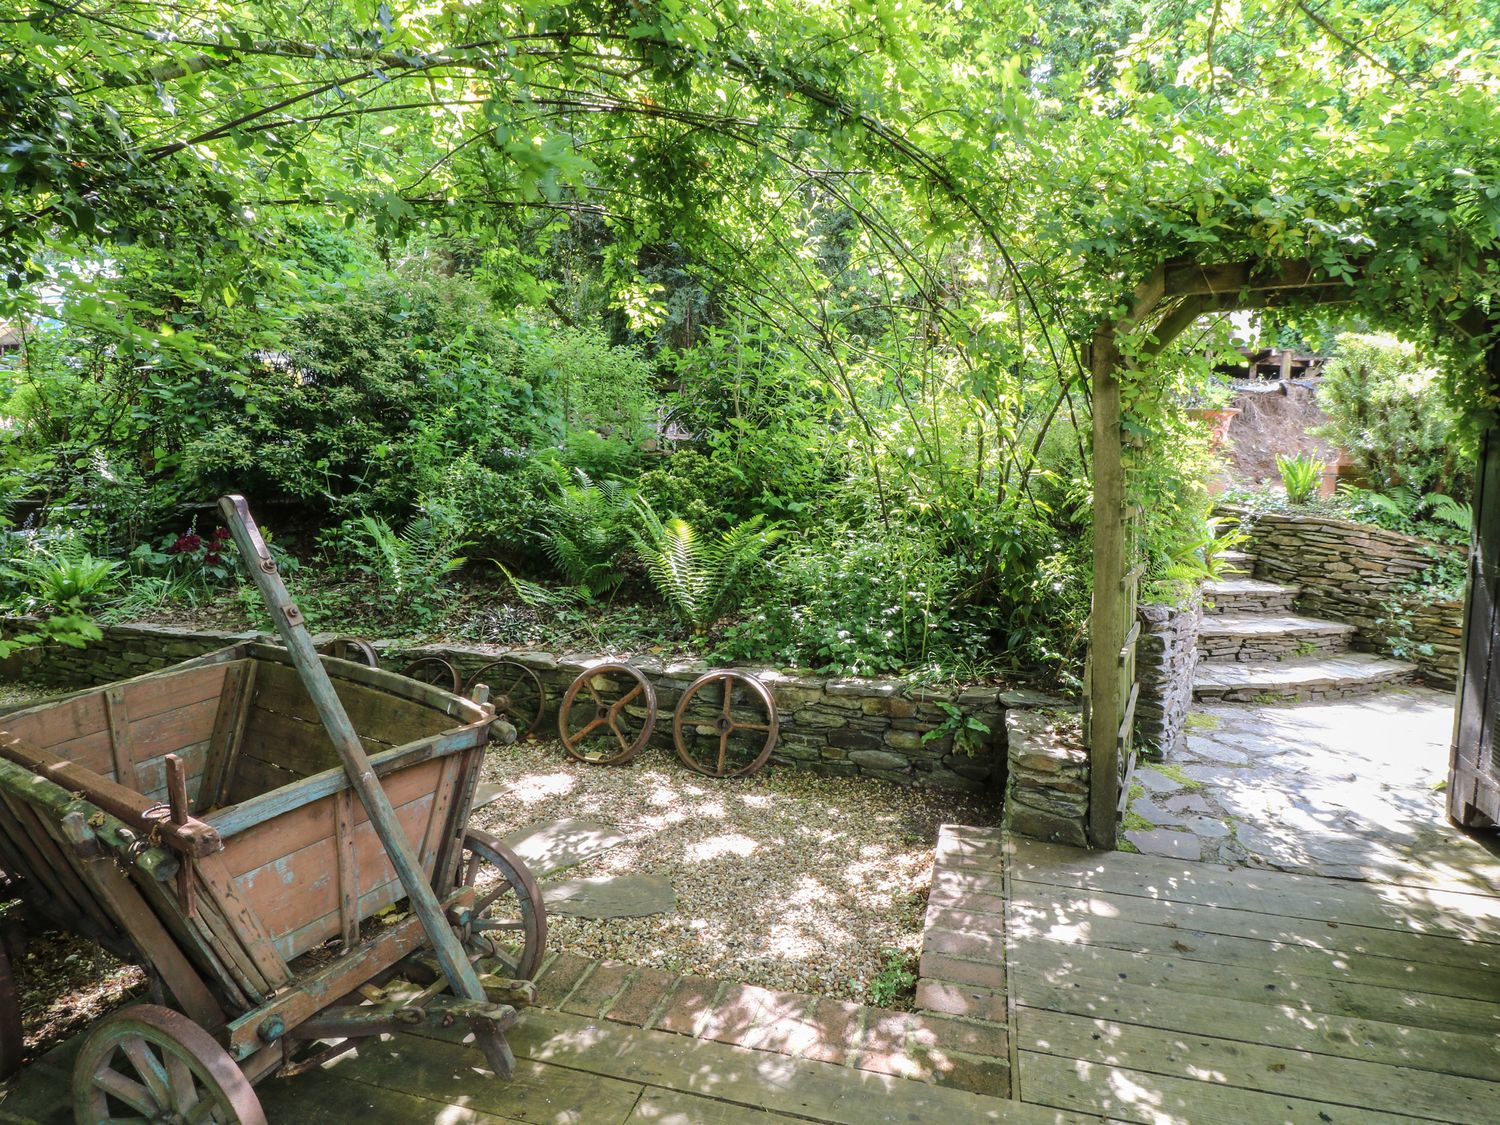 Potting Shed, Okehampton, Devon. One bedroom. Perfect for couples. Woodland setting. Shared hot tub.